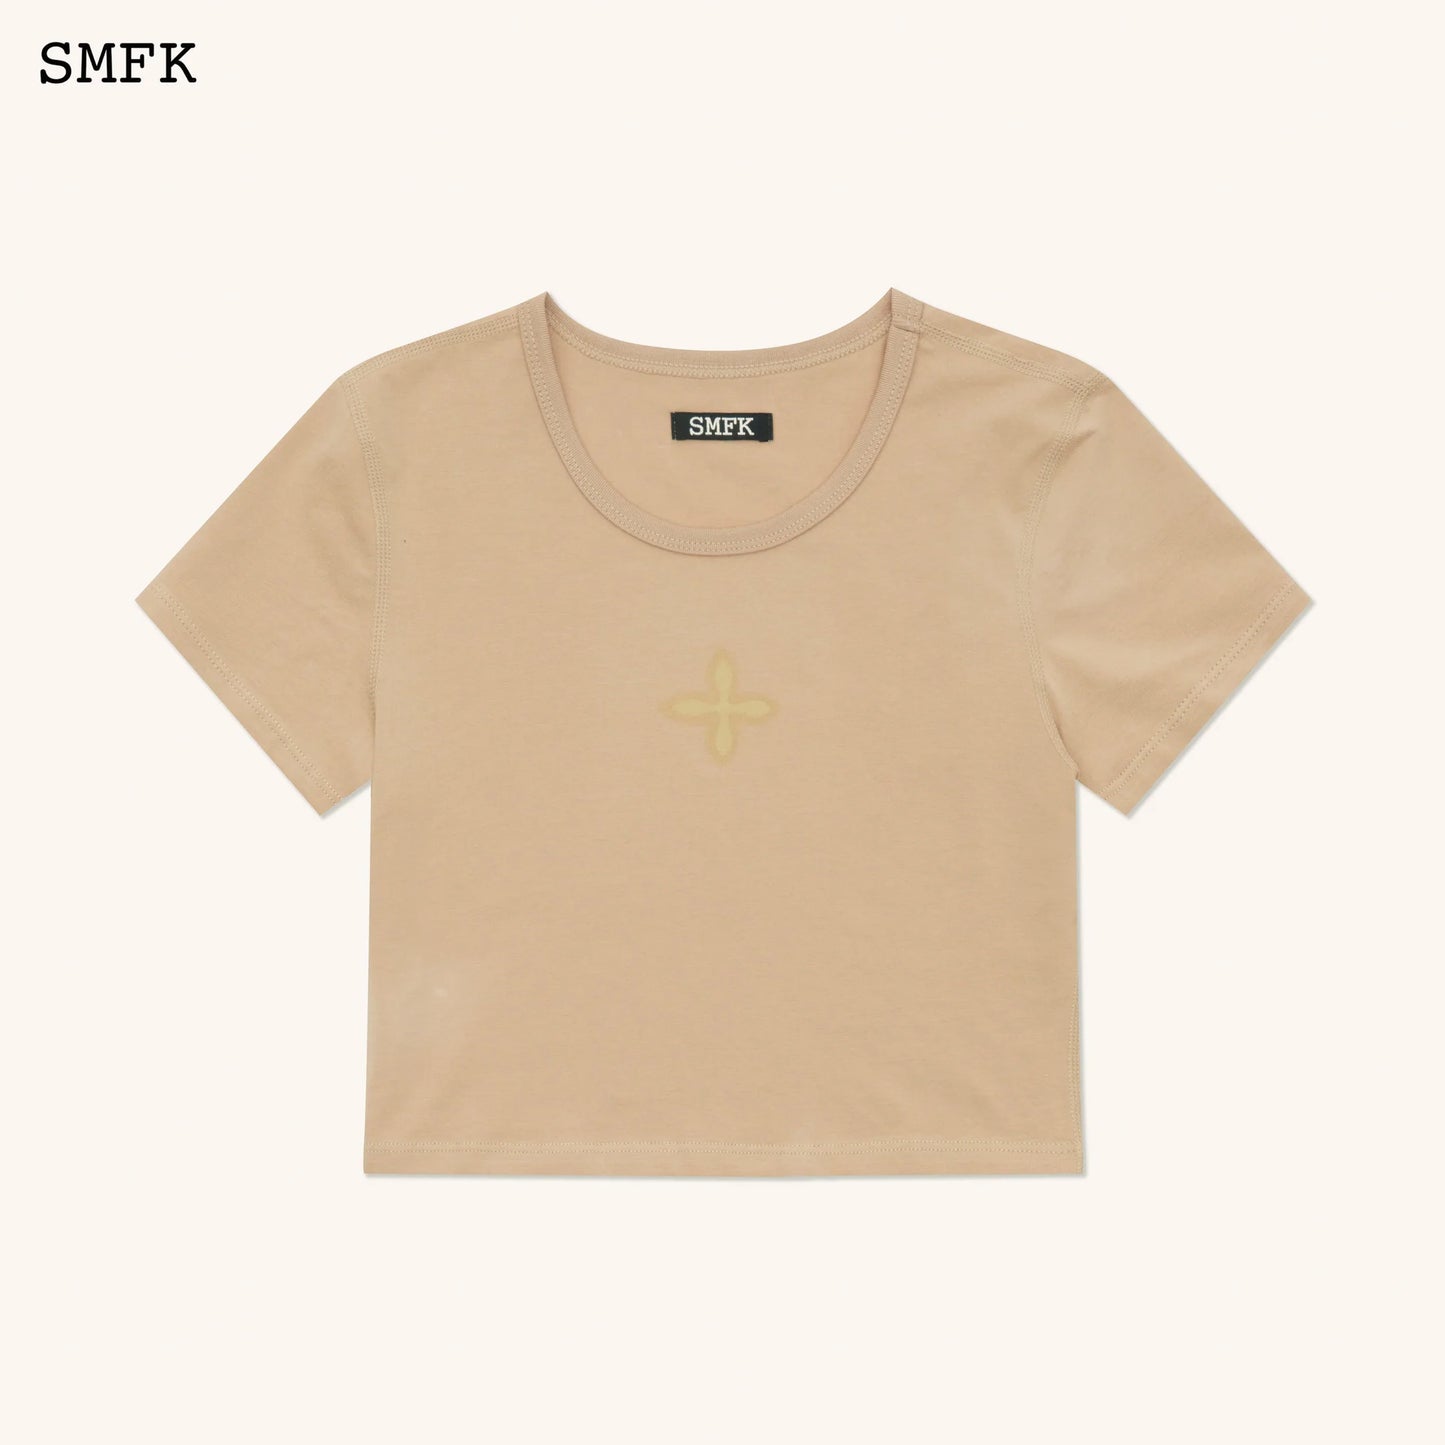 Compass Cross Sport Tights Tee In Wheat